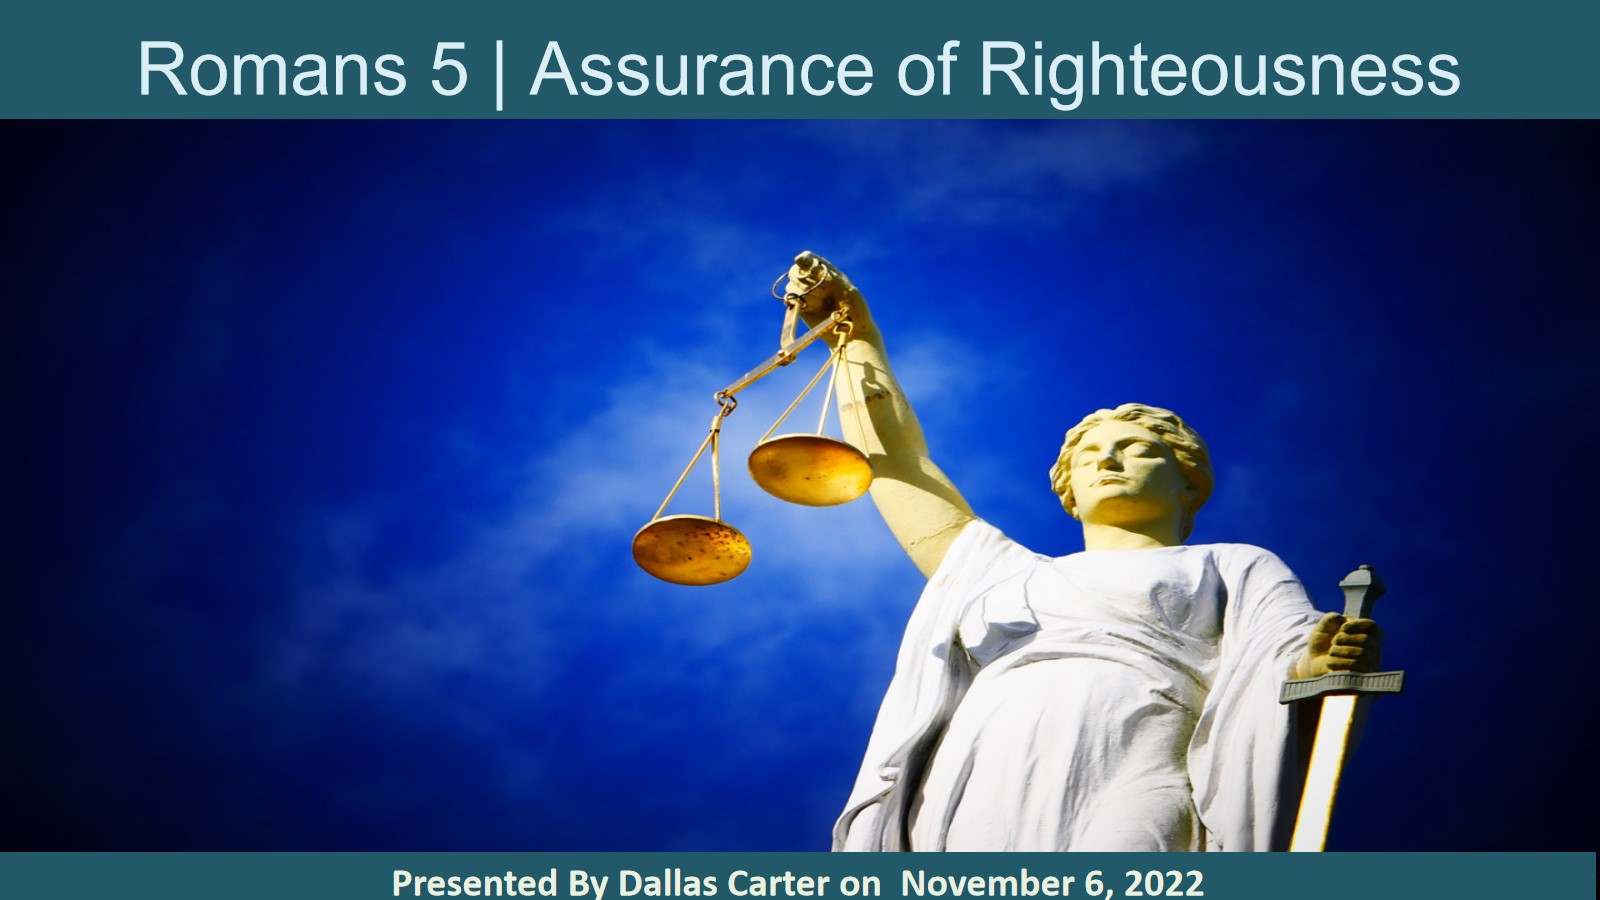 The Assurance of Righteousness